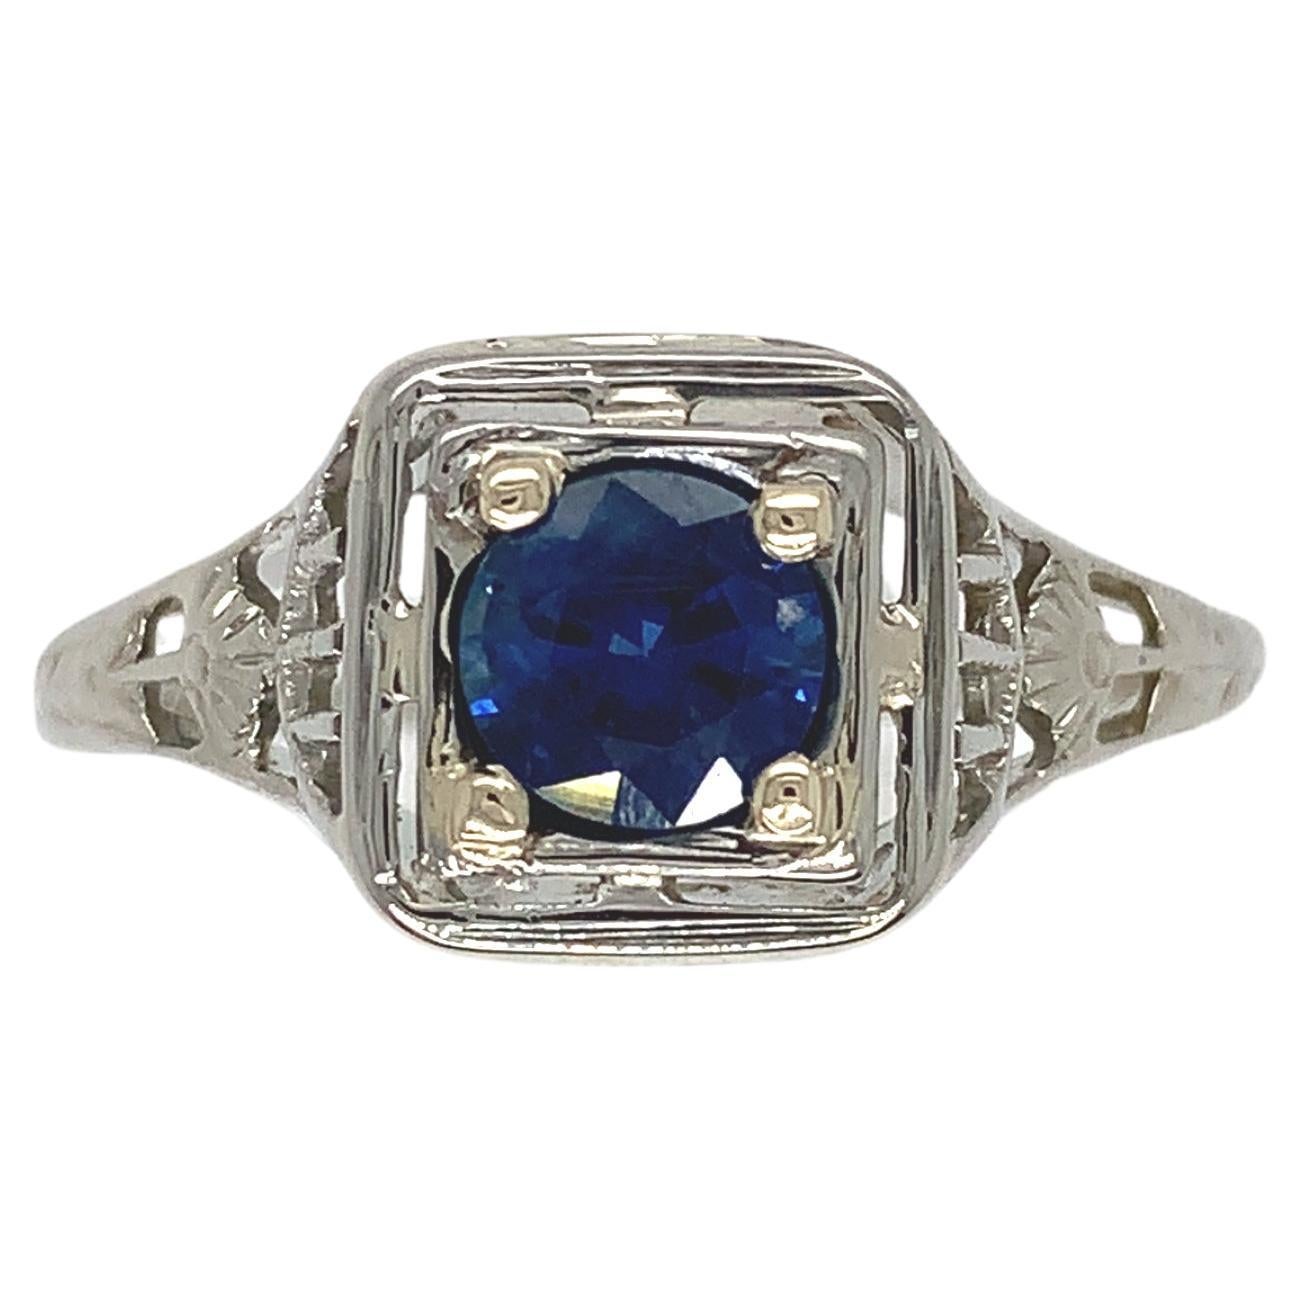 What is an Edwardian-style ring?